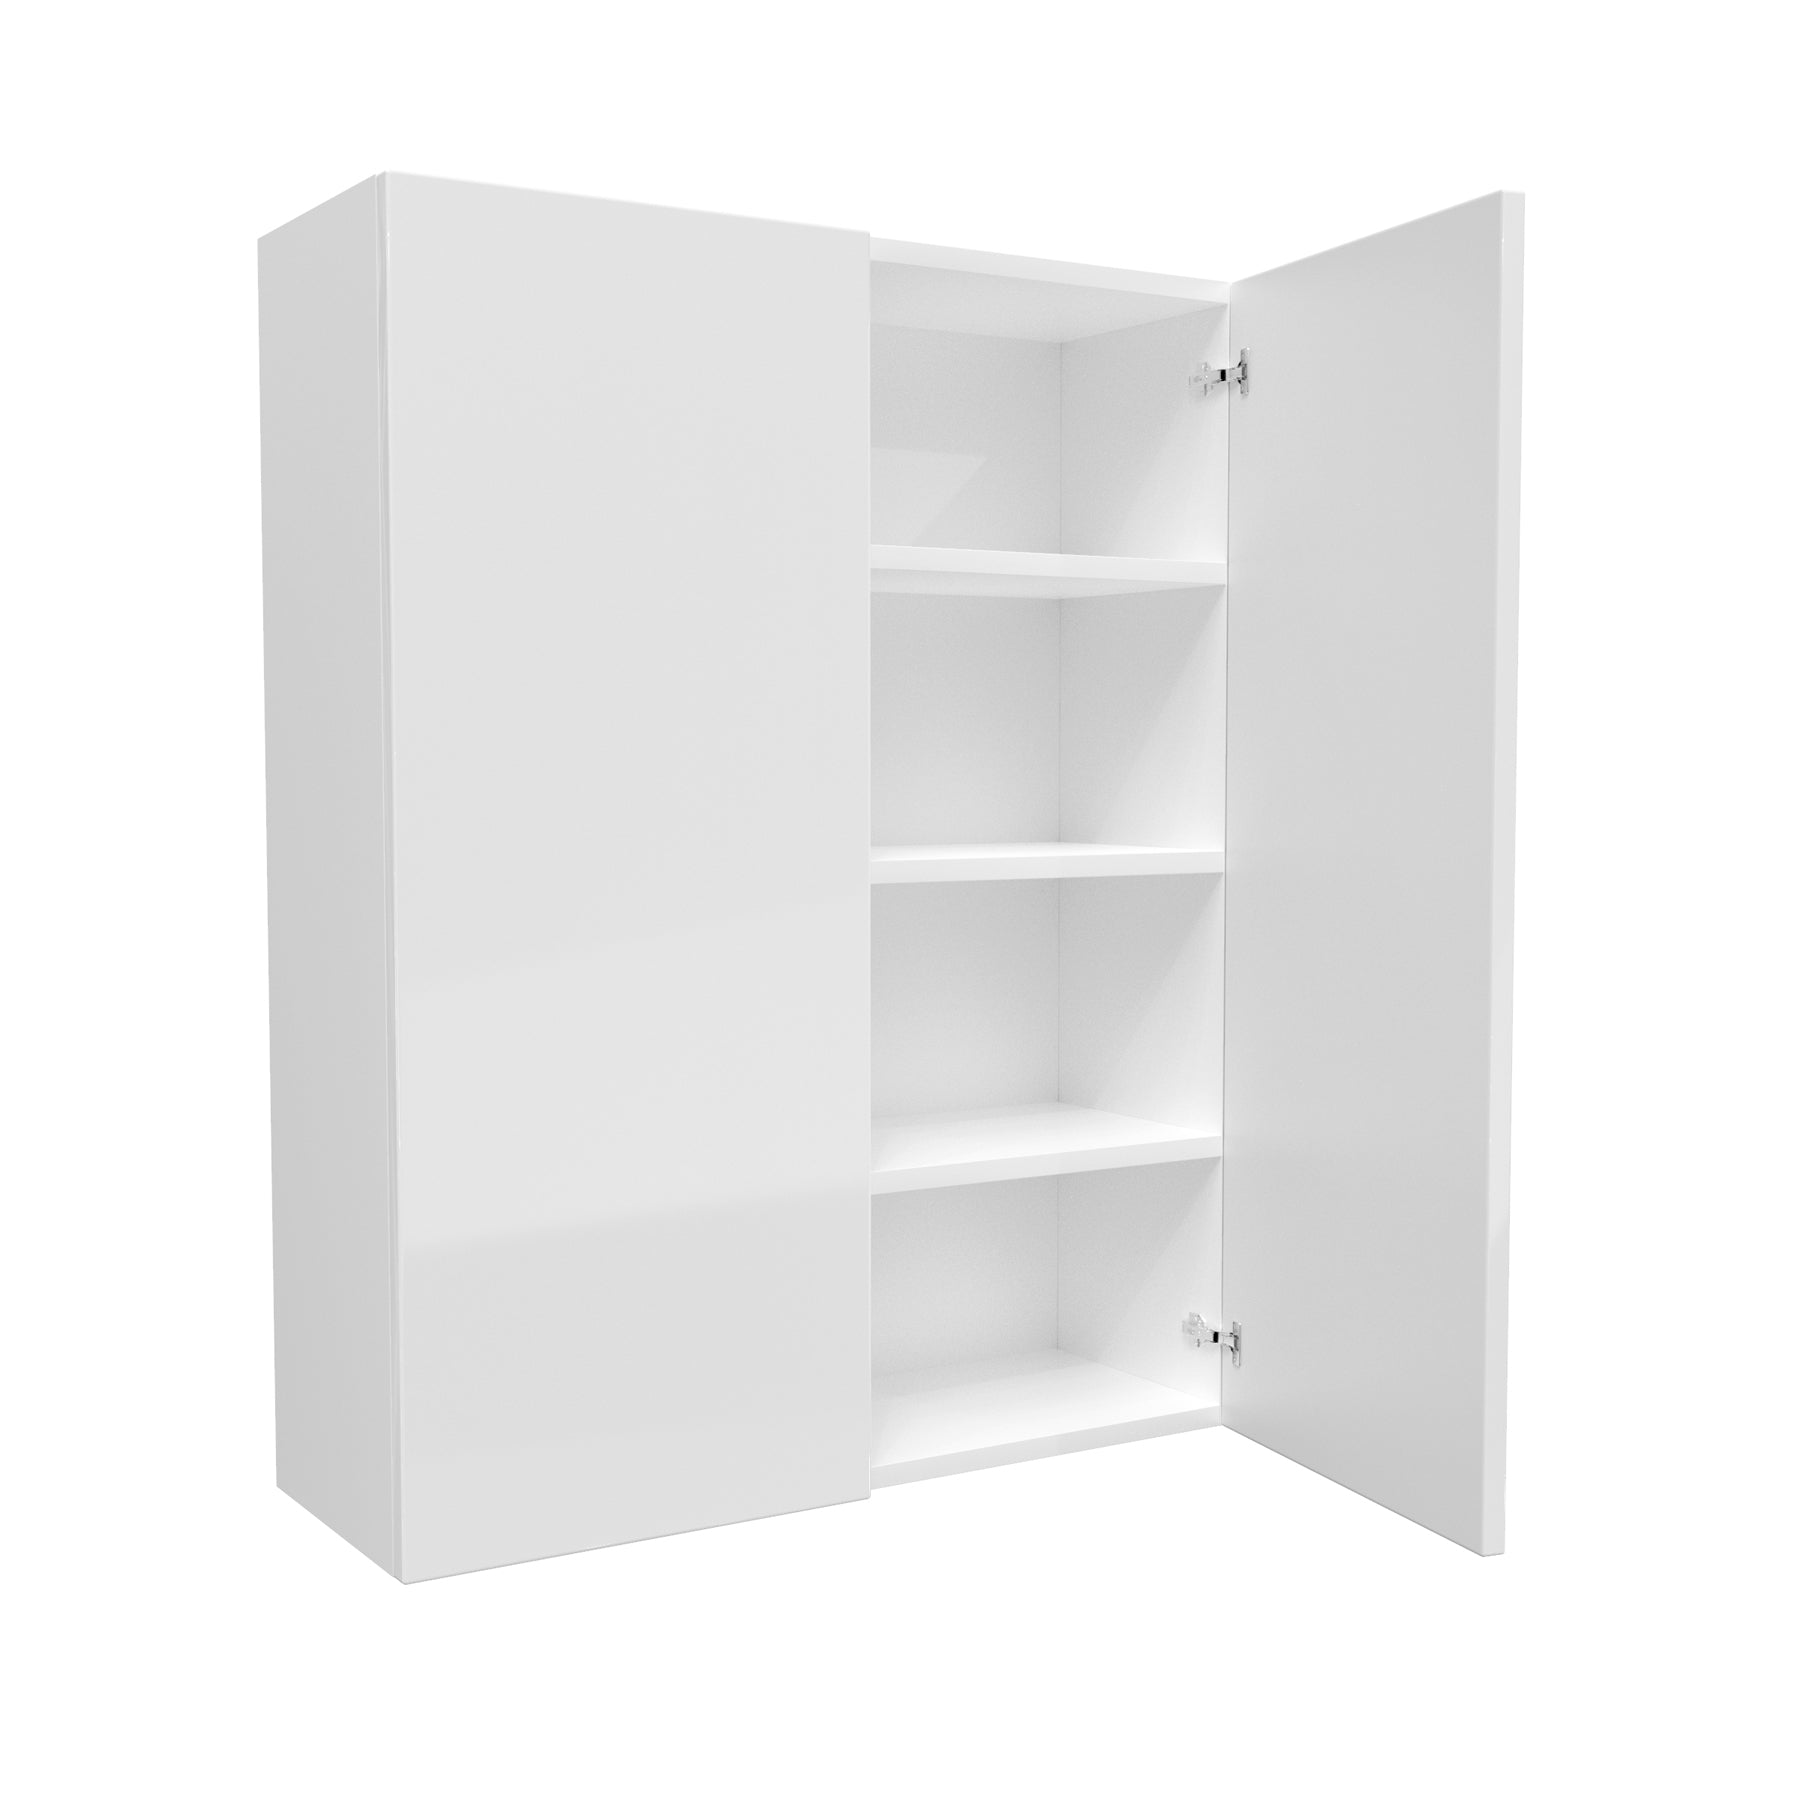 Double Door Wall Cabinet | Milano White | 33W x 42H x 12D